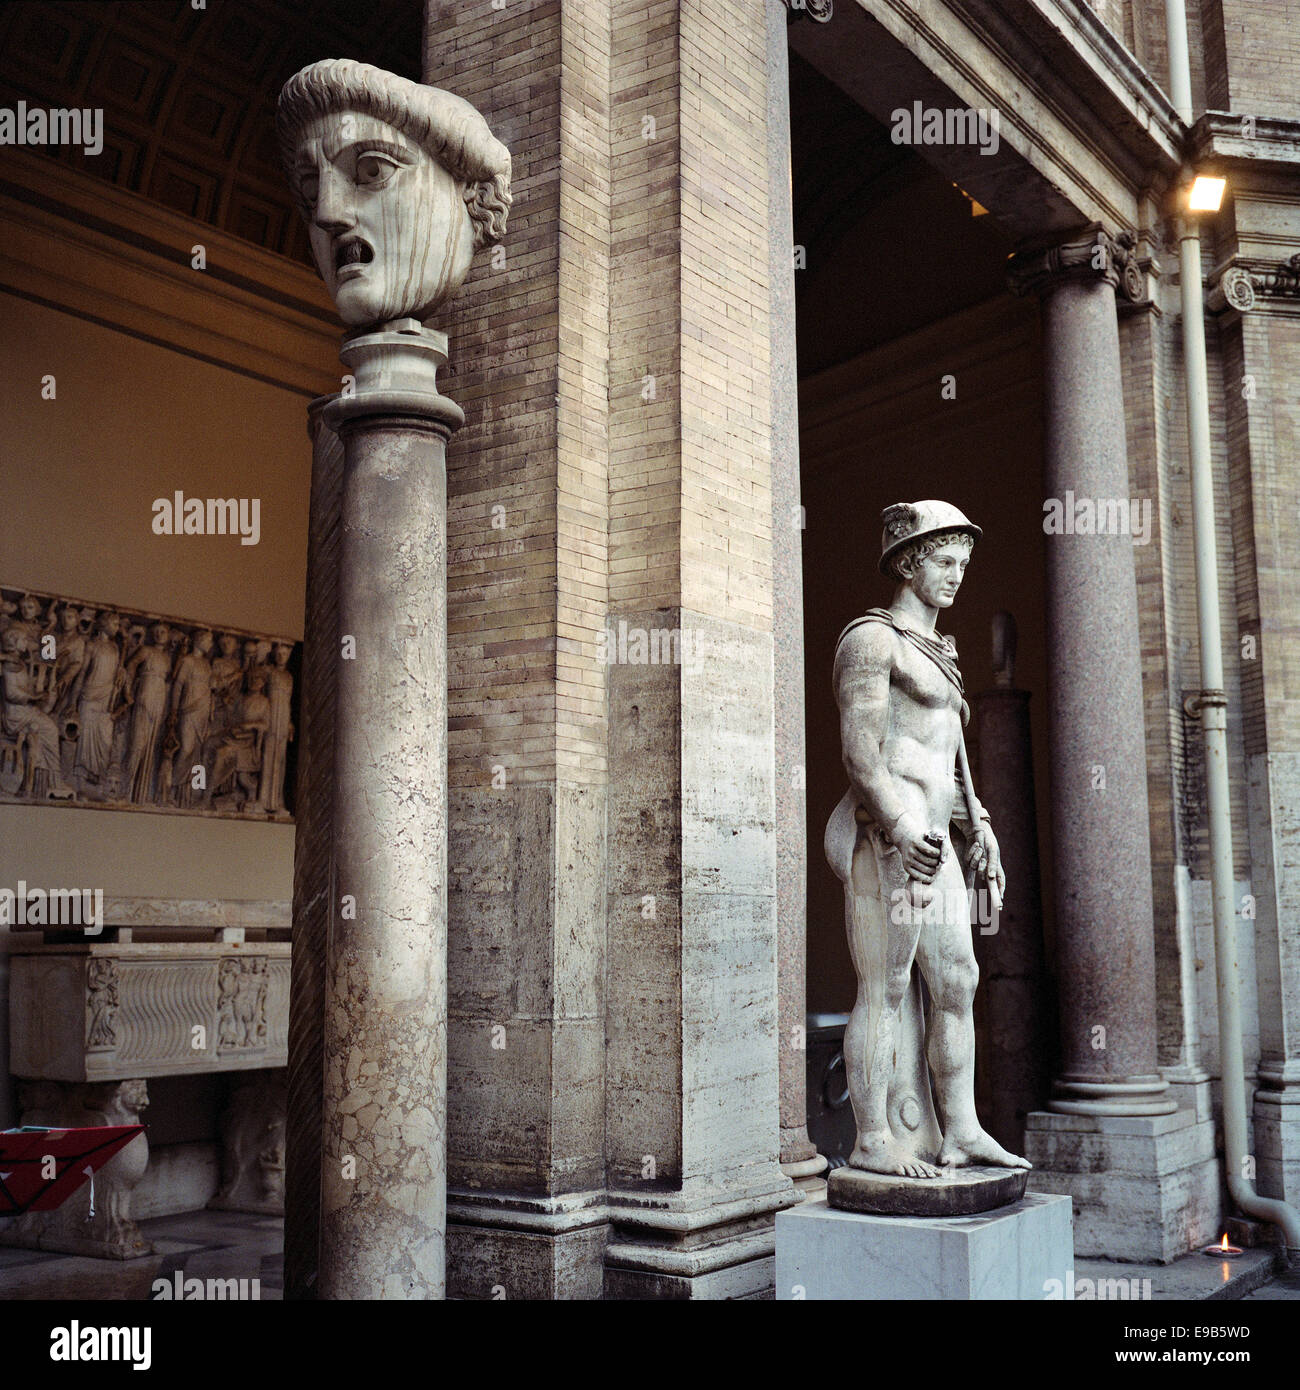 Rome. Italy. Vatican Museums. Statues in the Cortile Ottagono, inner courtyard of the Belvedere Palace, Museo Pio-Clementino. Stock Photo